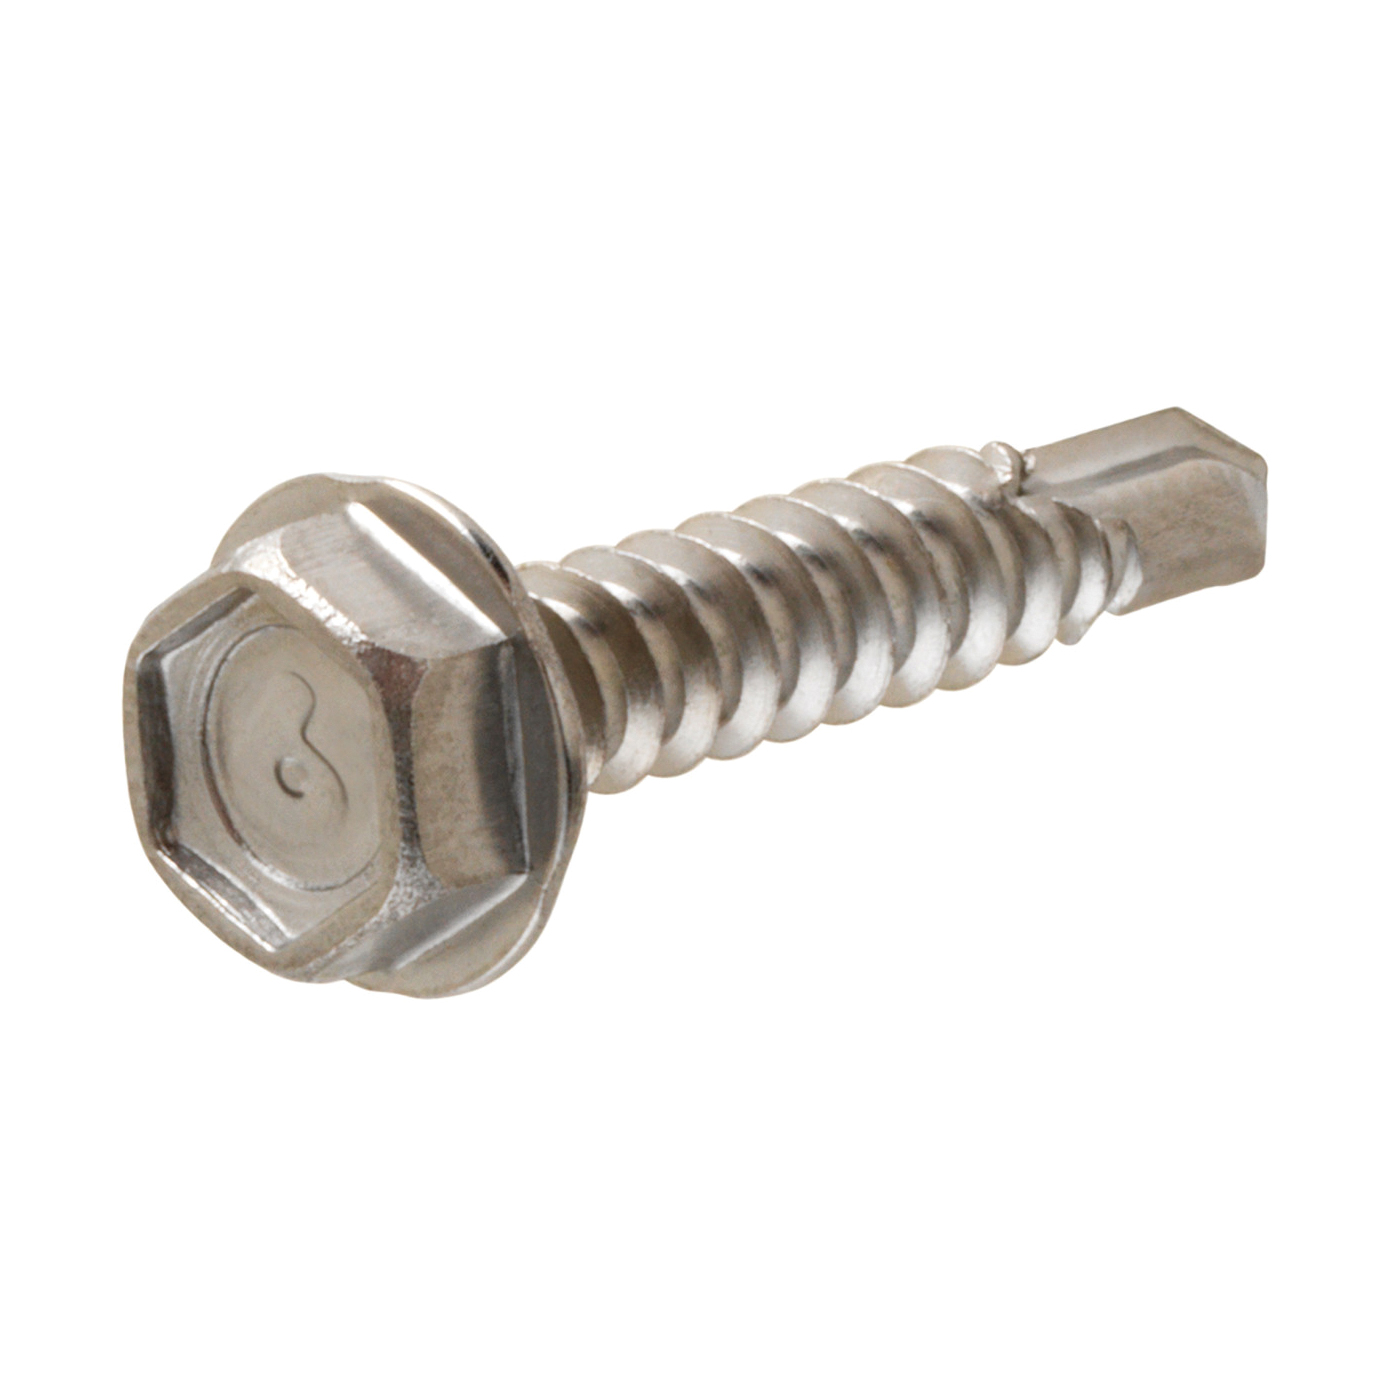 881840 Screw, #12 Thread, 2 in L, Coarse Thread, Washer Head, Hex Drive, Self-Drilling Point, Stainless Steel